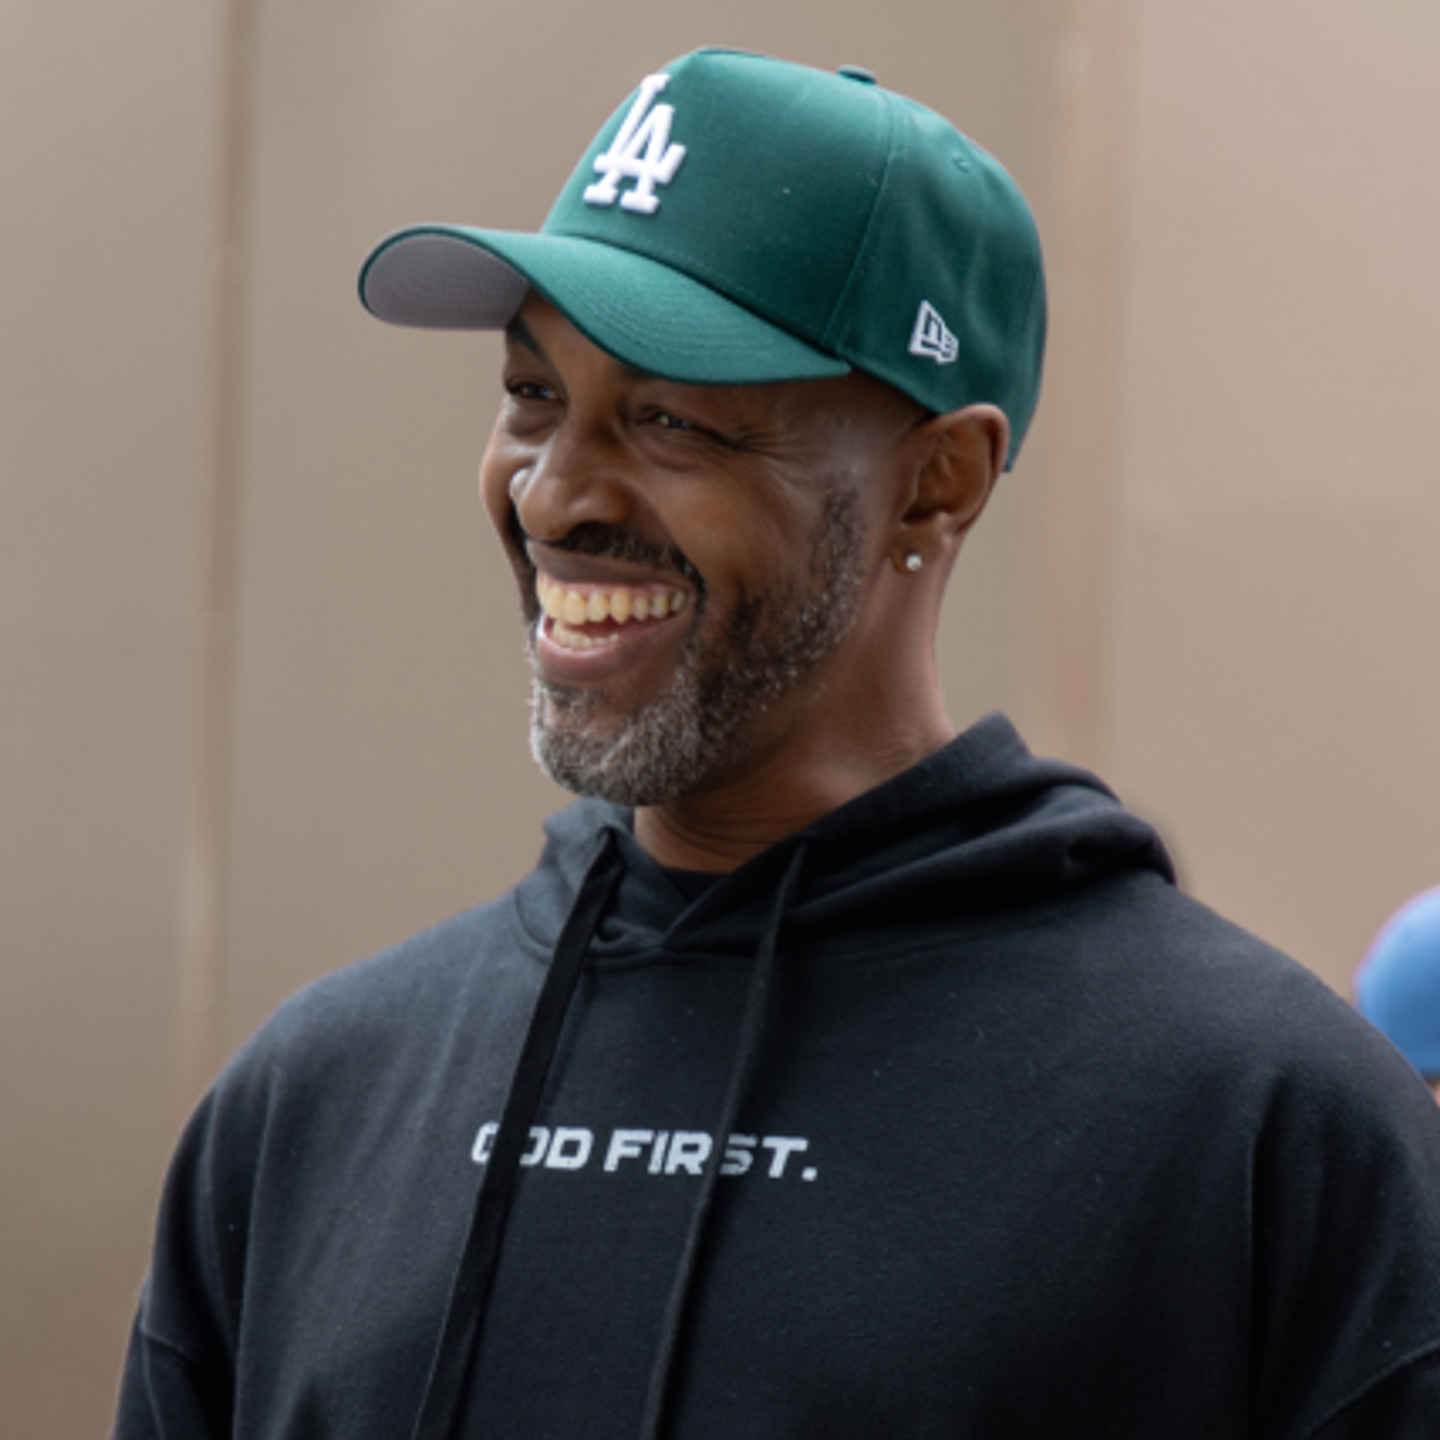 Man smiling, wearing a green cap and black hoodie with 'God First' text.